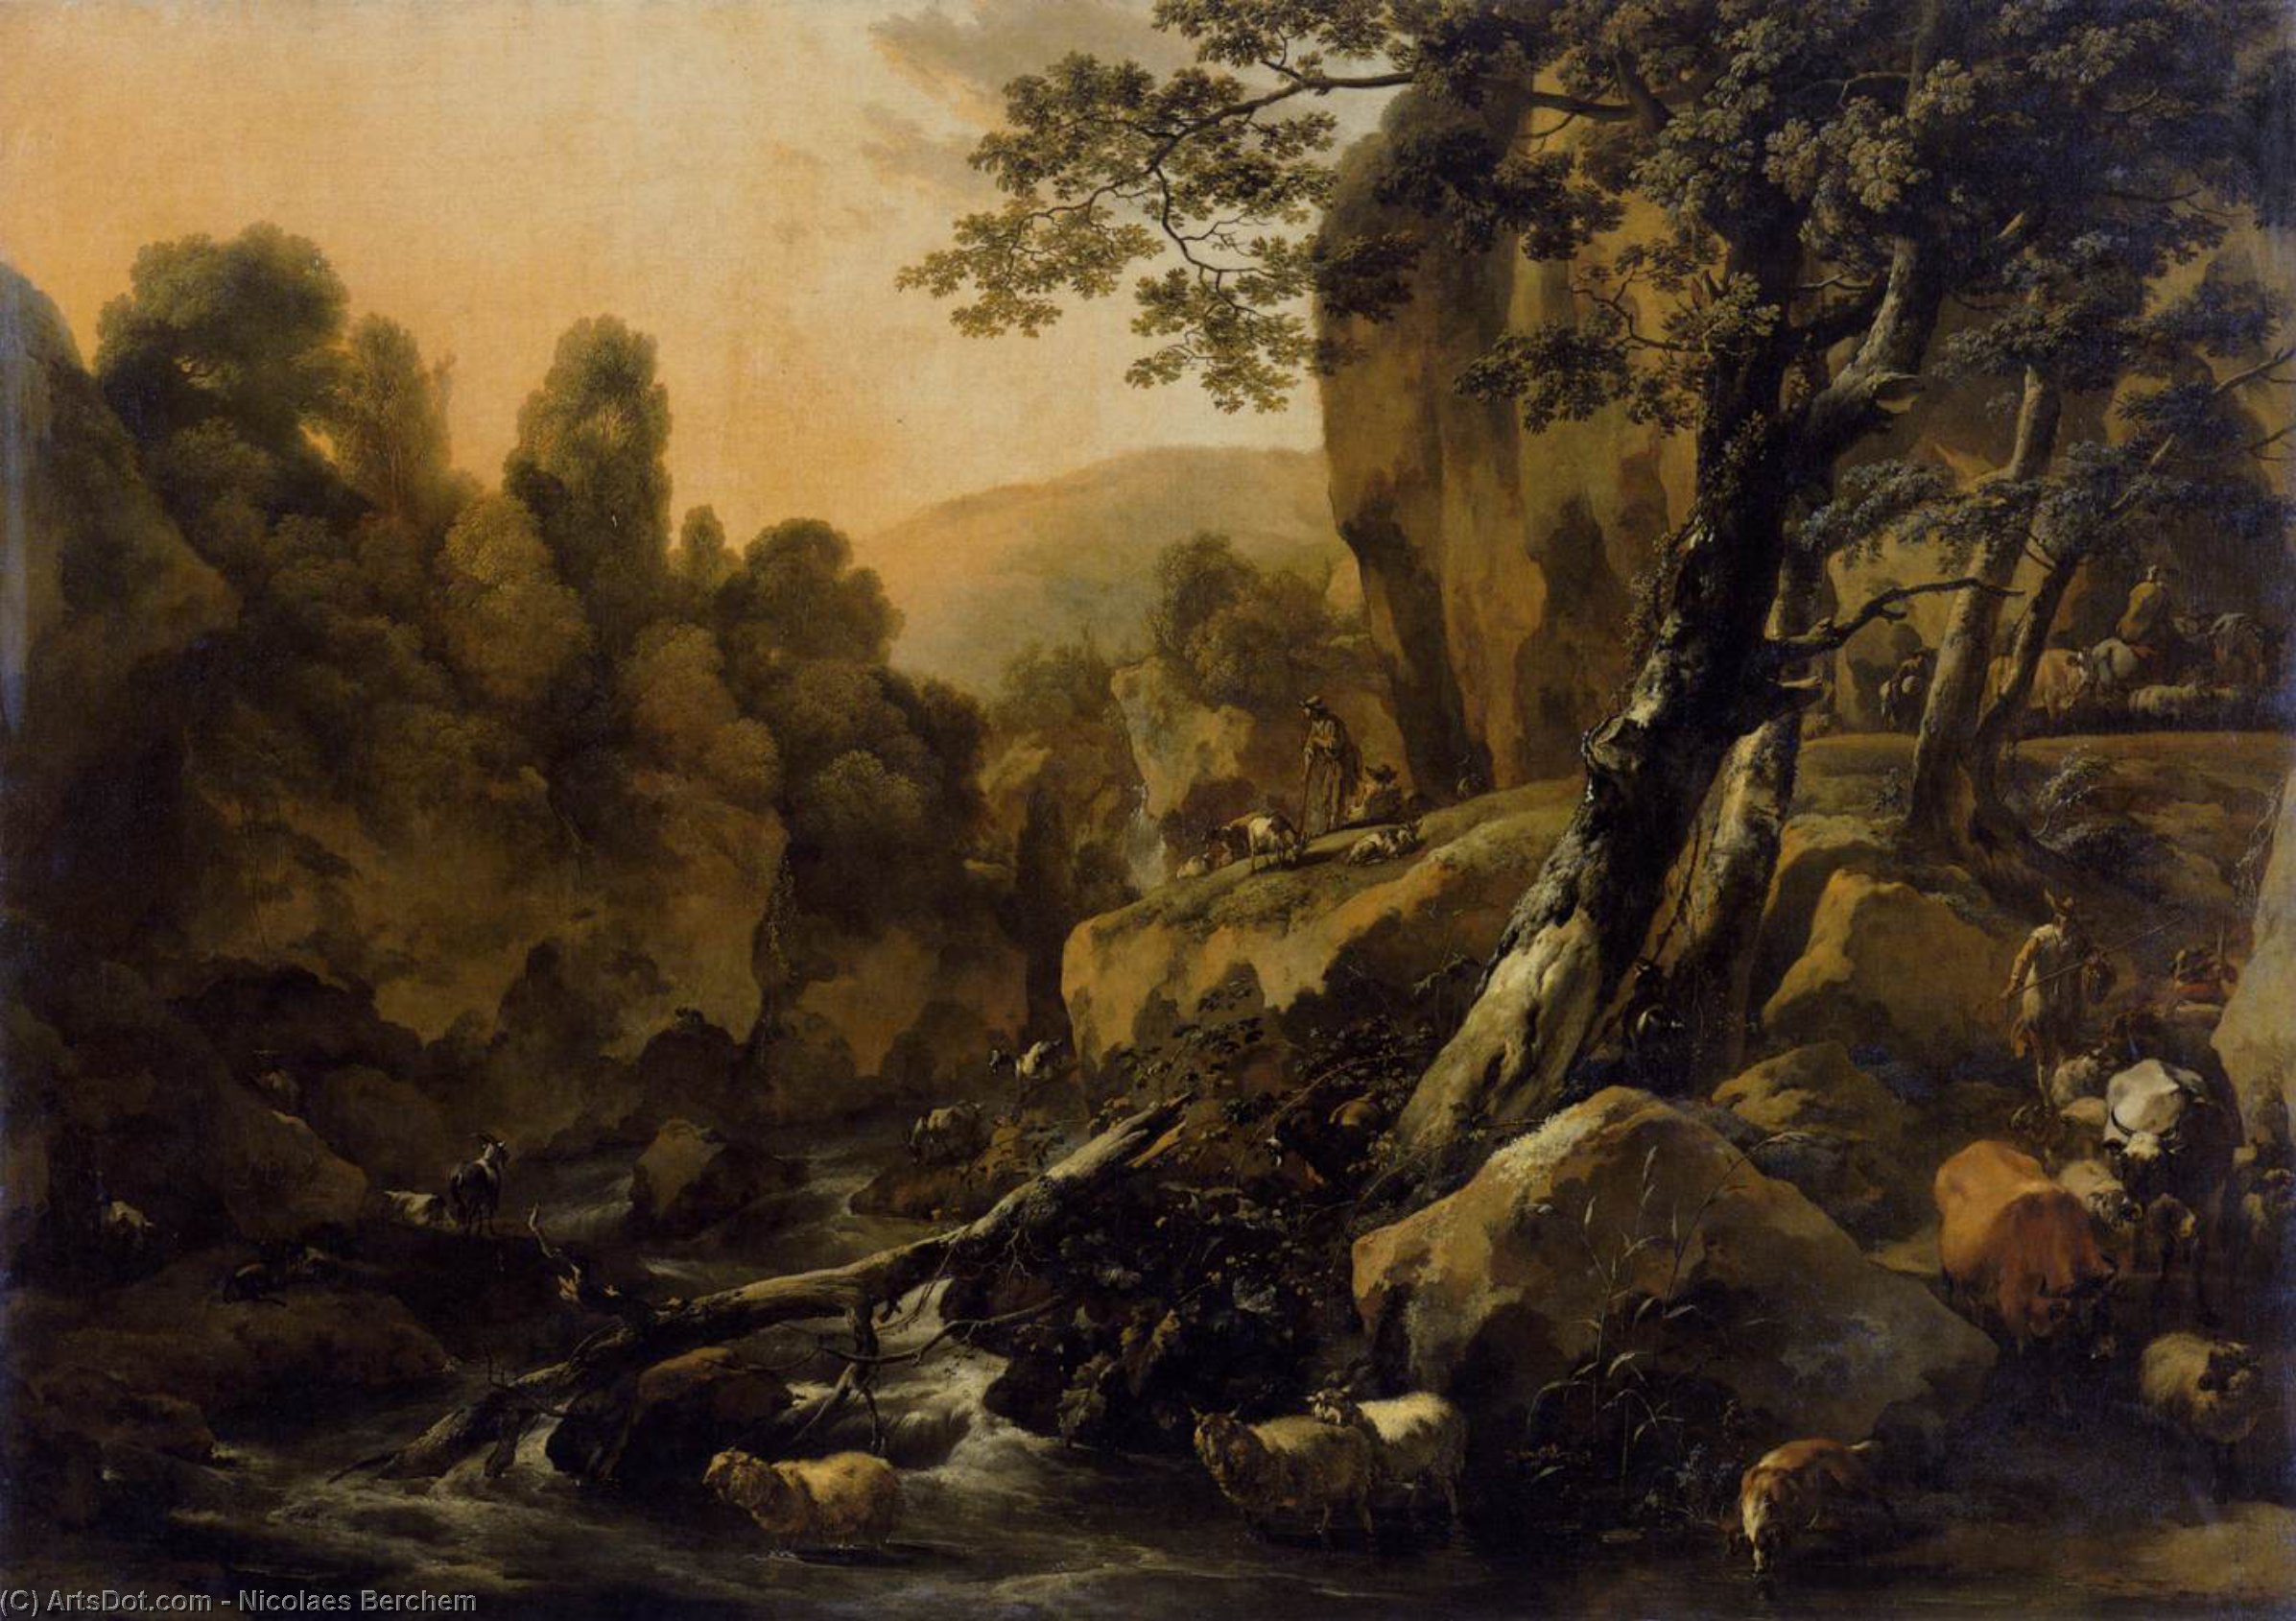 Buy Museum Art Reproductions Herdsmen and Herds at a Waterfall, 1665 by Nicolaes Berchem | ArtsDot.com